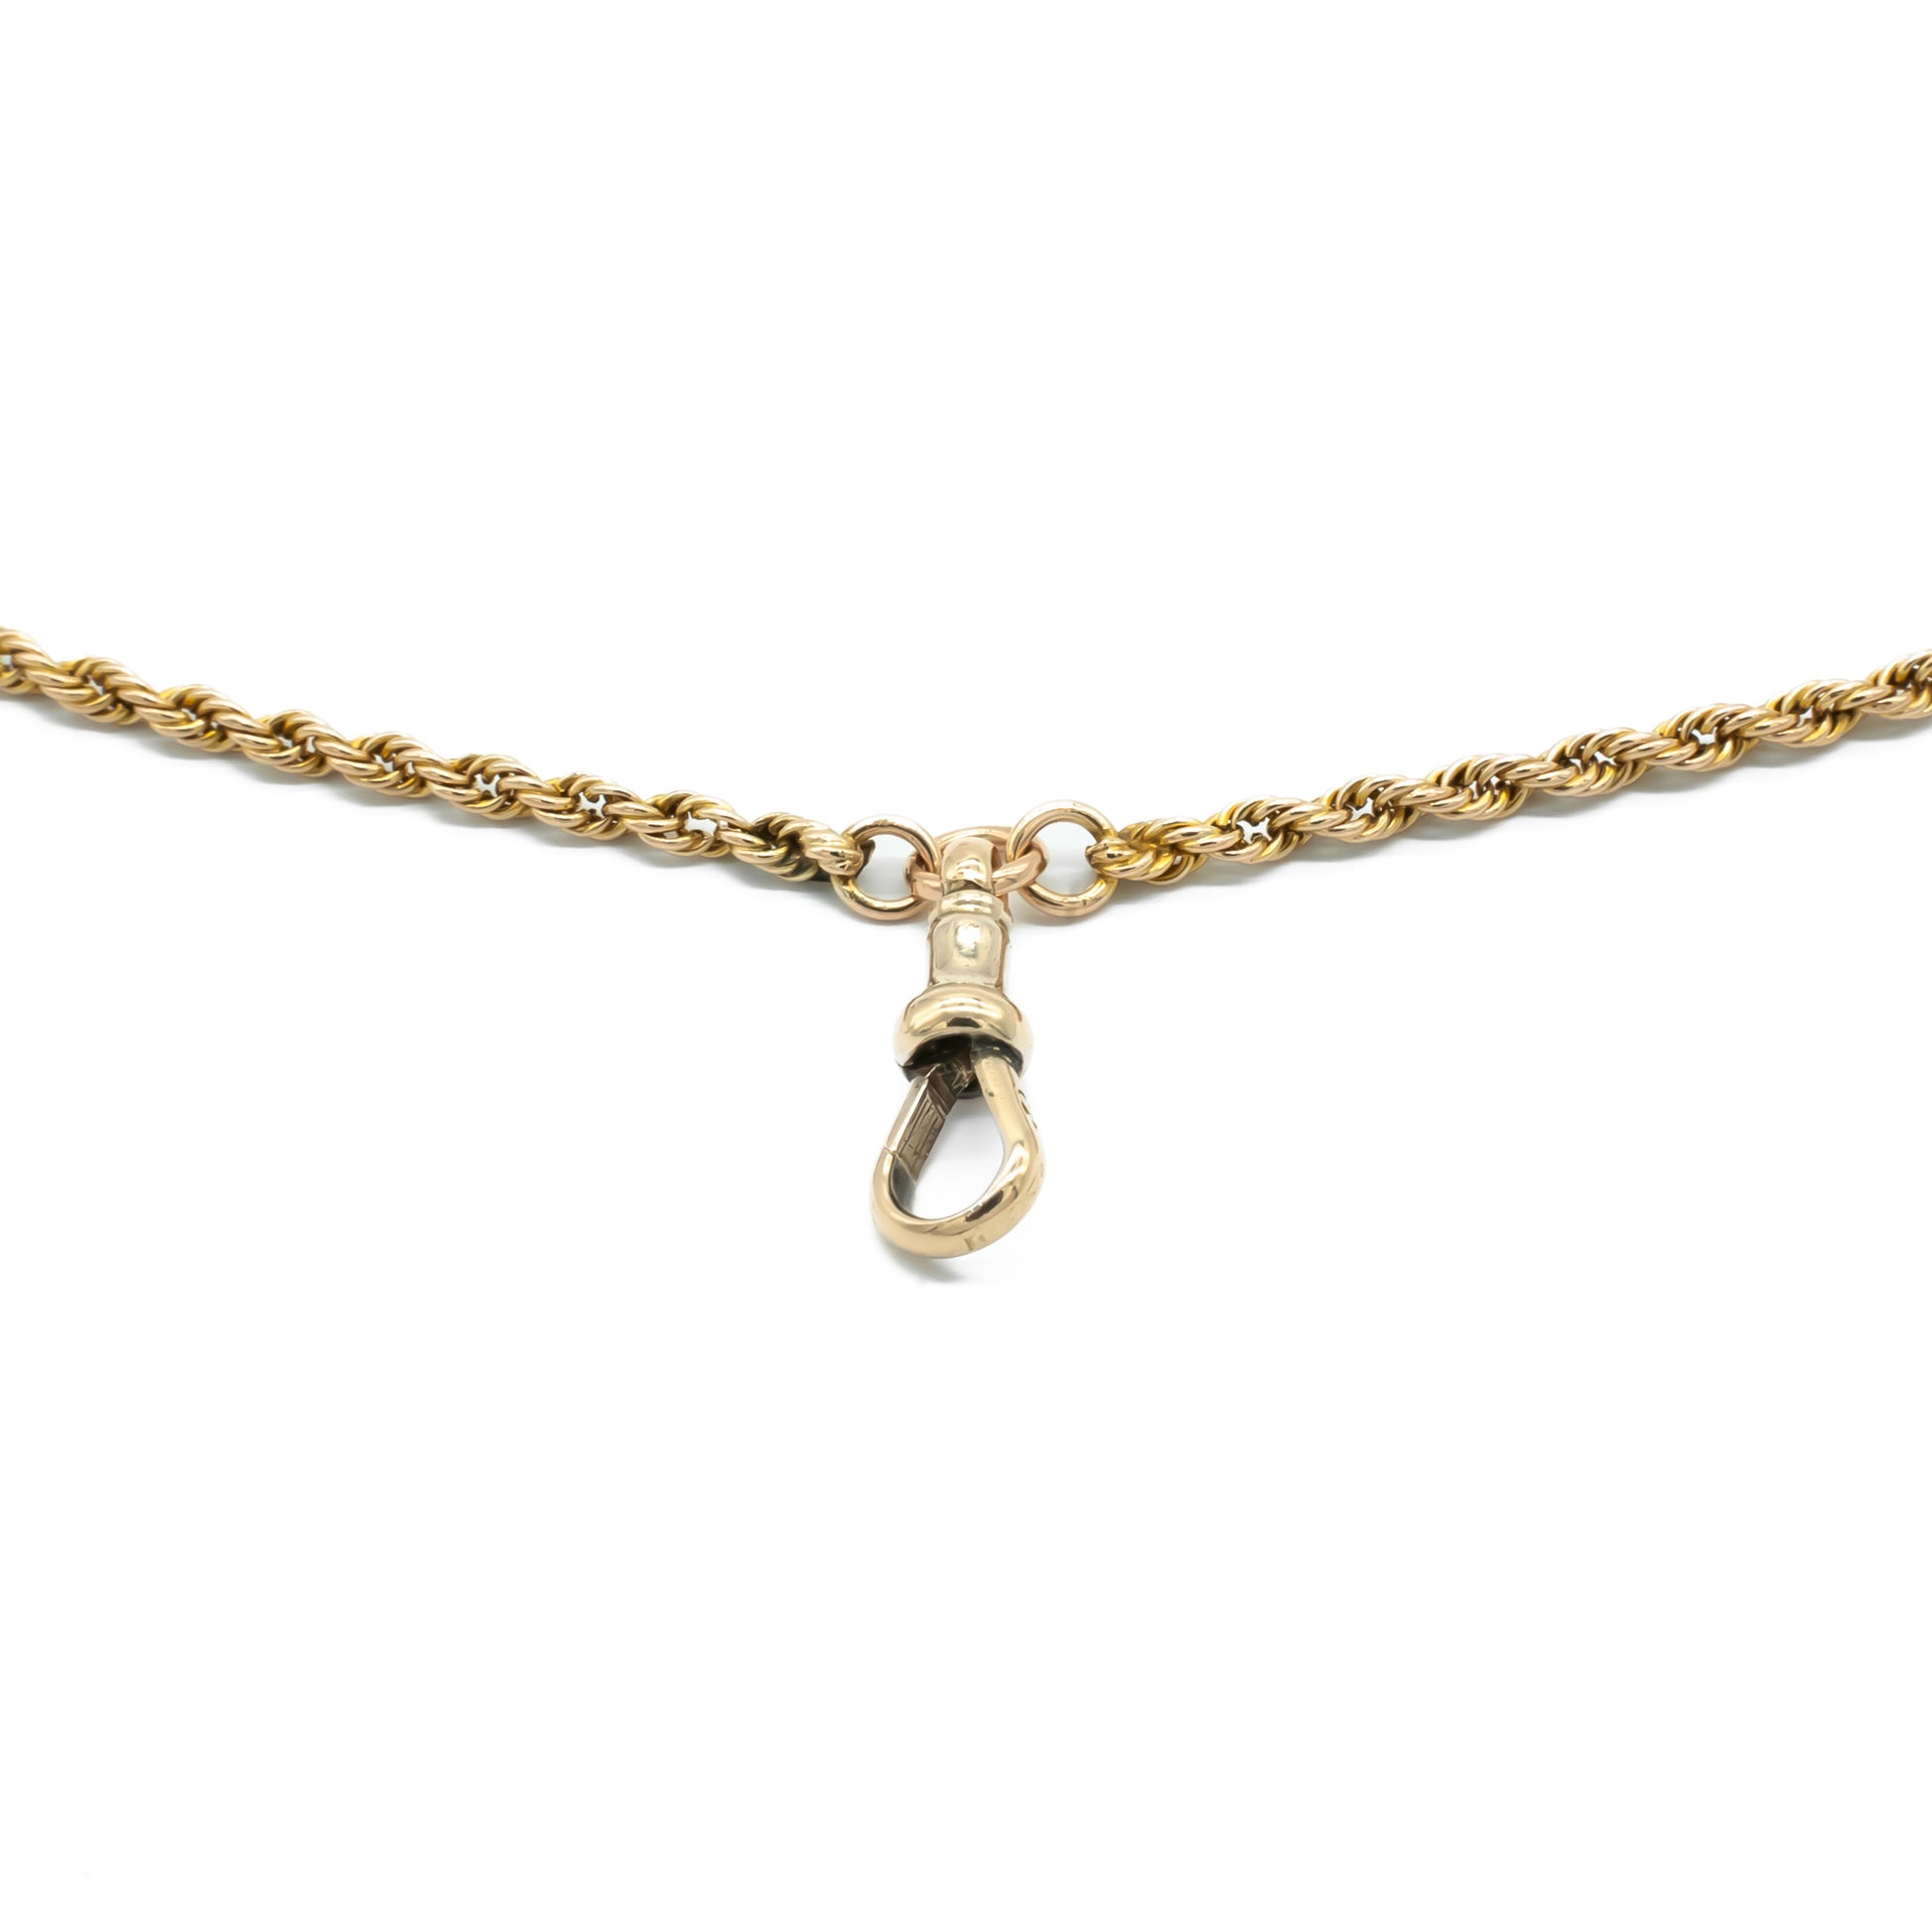 Exquisite Victorian 9ct rose gold fancy link rope chain with dog clip attachment. Can be worn as a single or double chain.